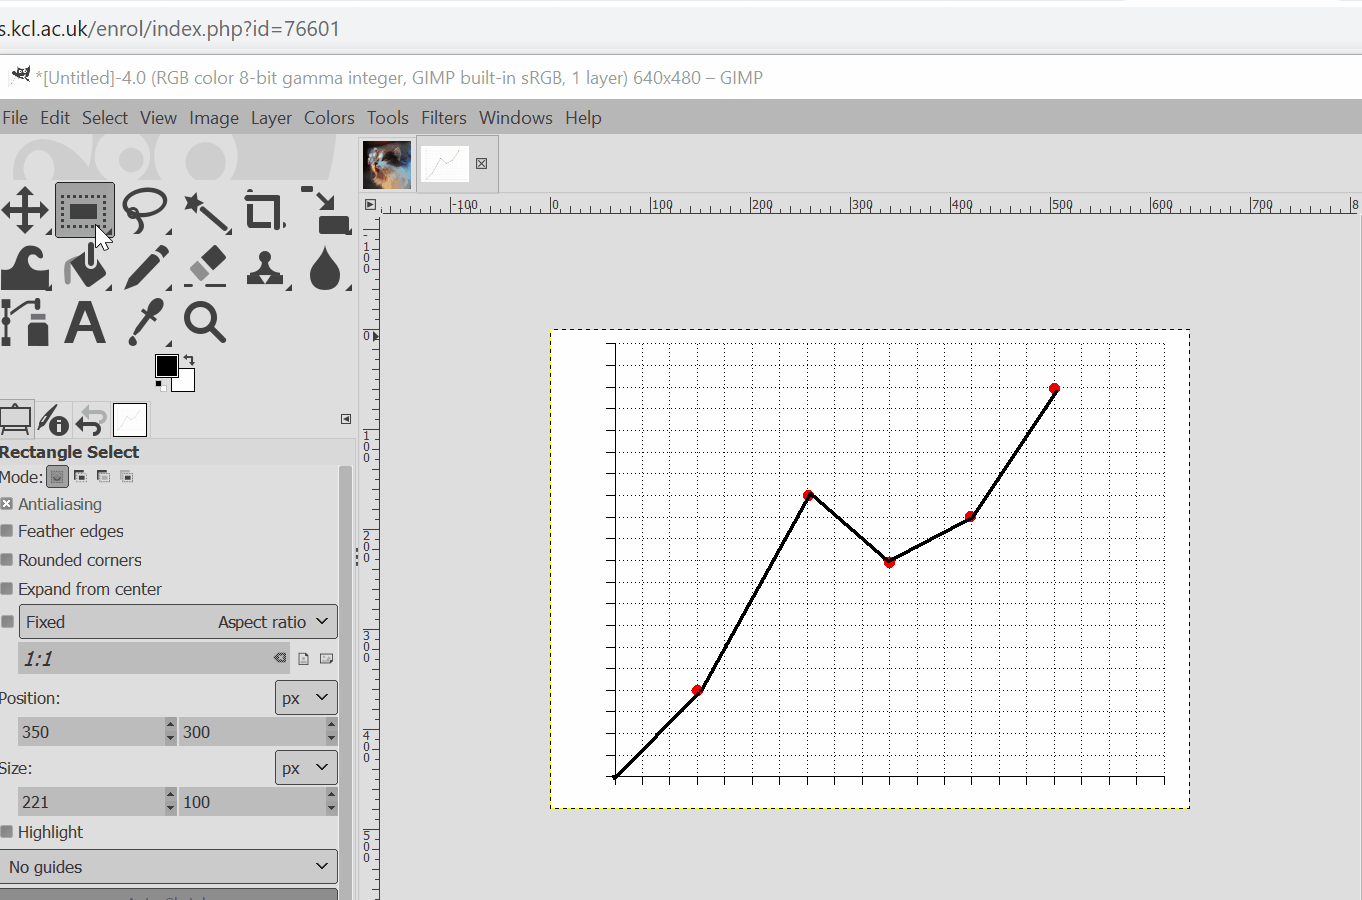 Animated gif showing a polygon being drawn on a graph